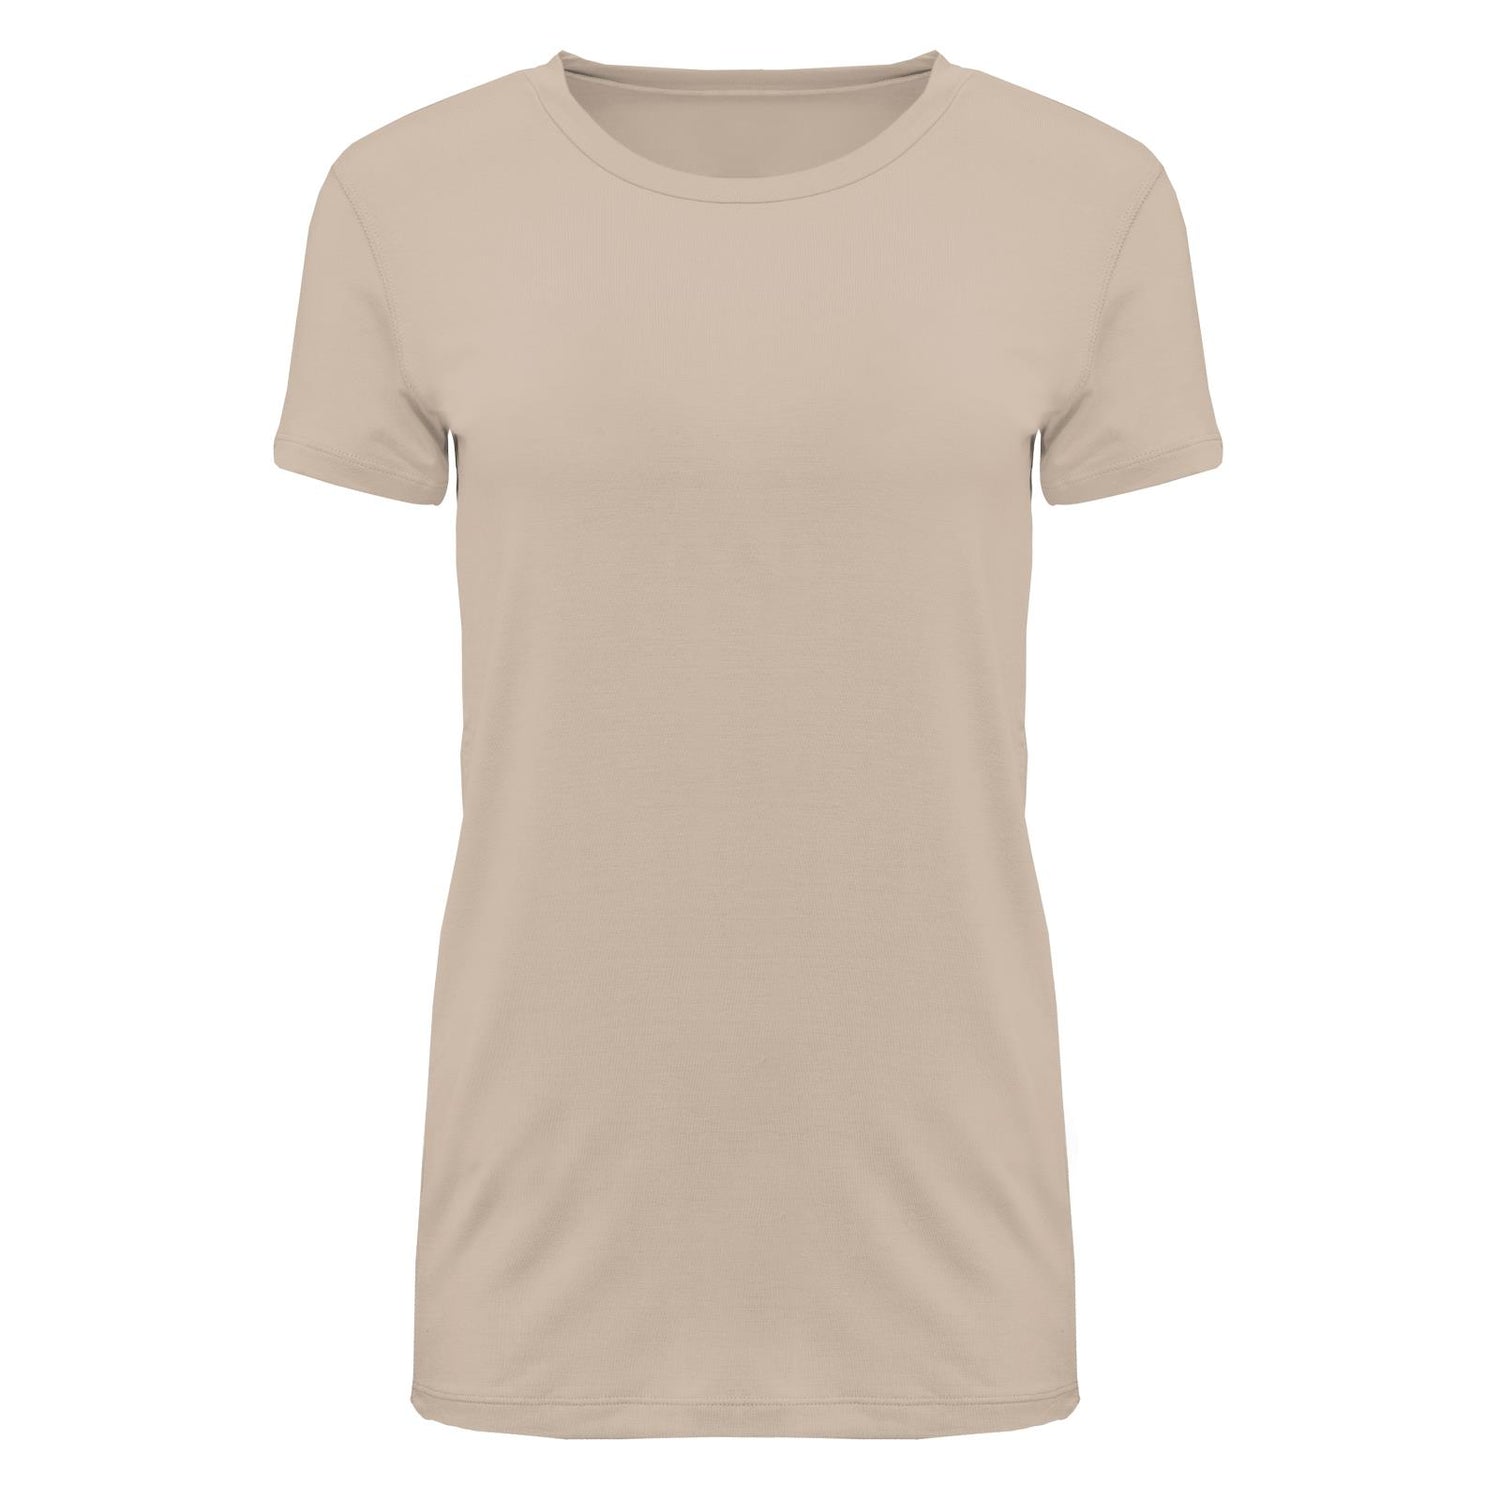 Women's Solid Short Sleeve Relaxed Tee in Burlap